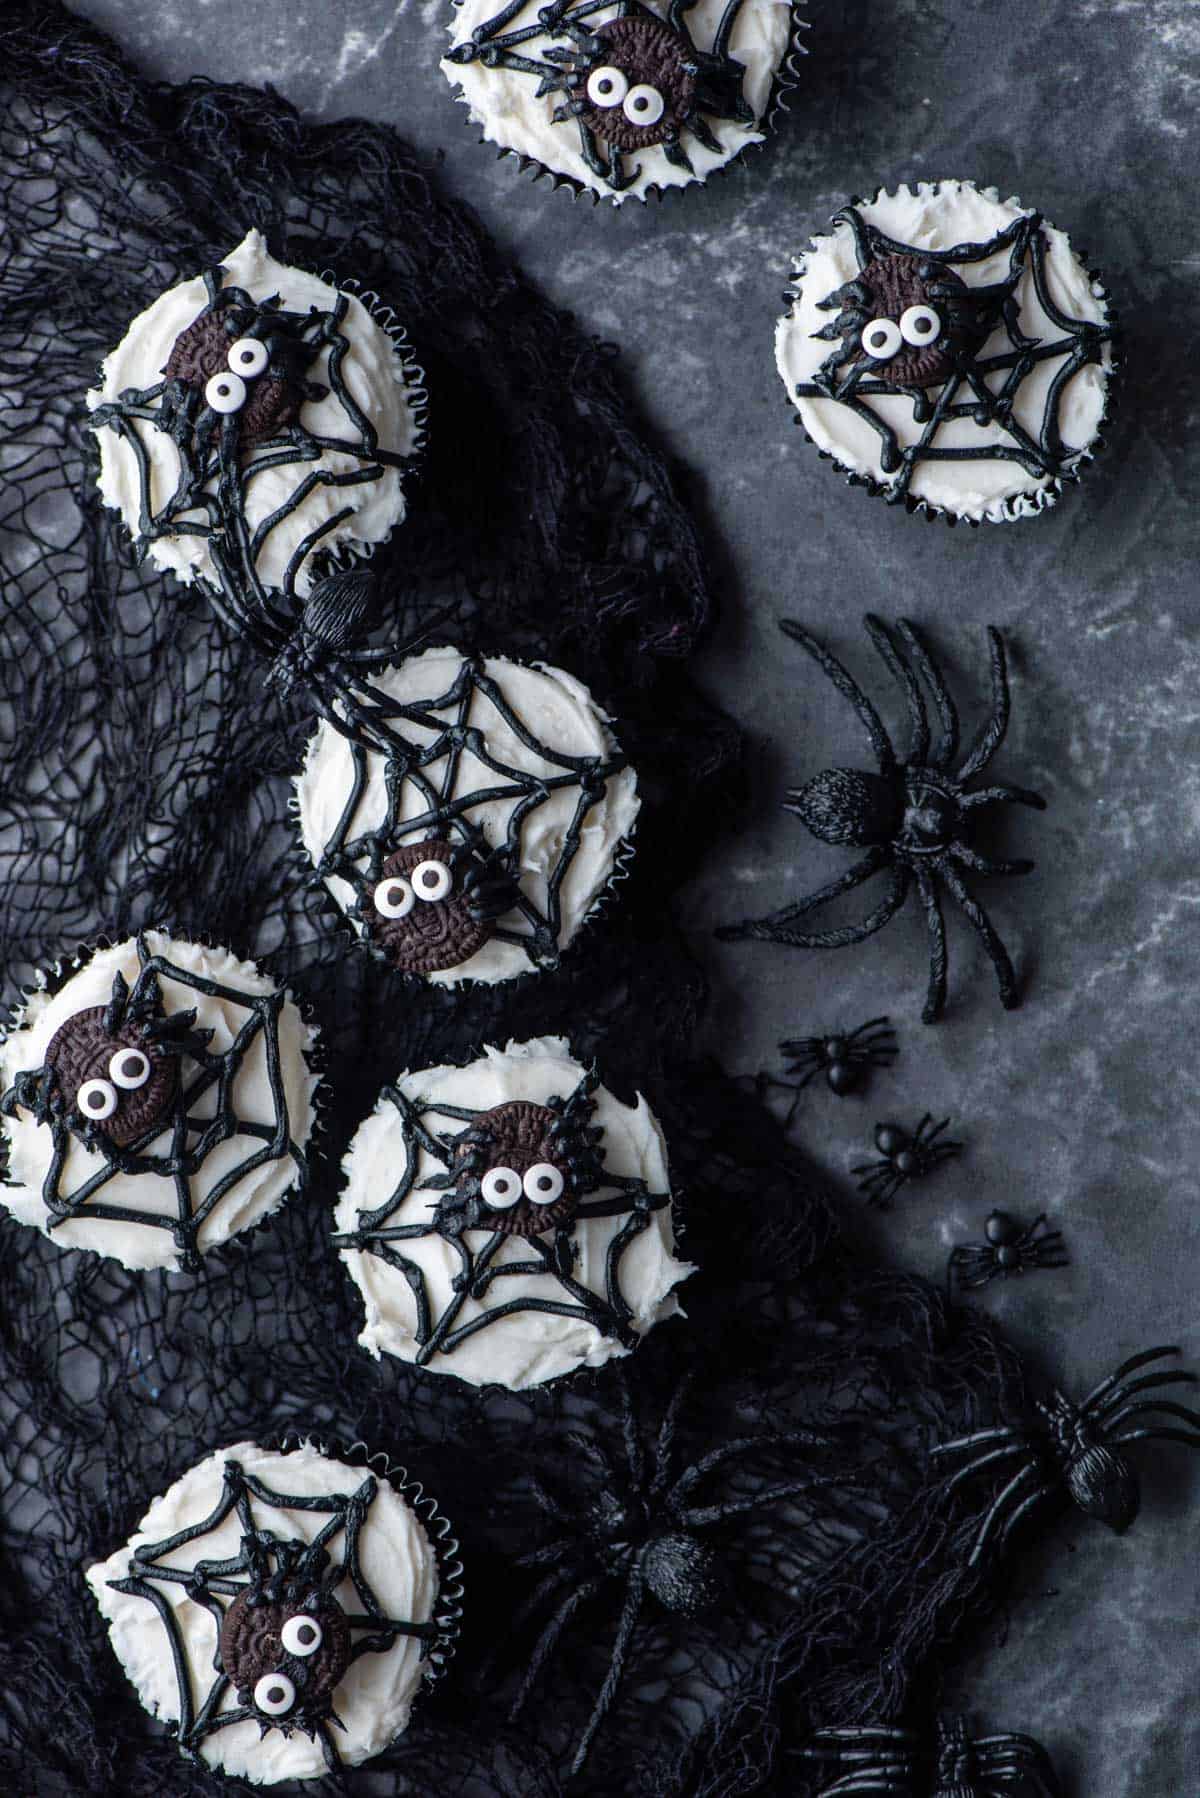 spider web cupcakes on a black netting with black plastic spiders arranged around them